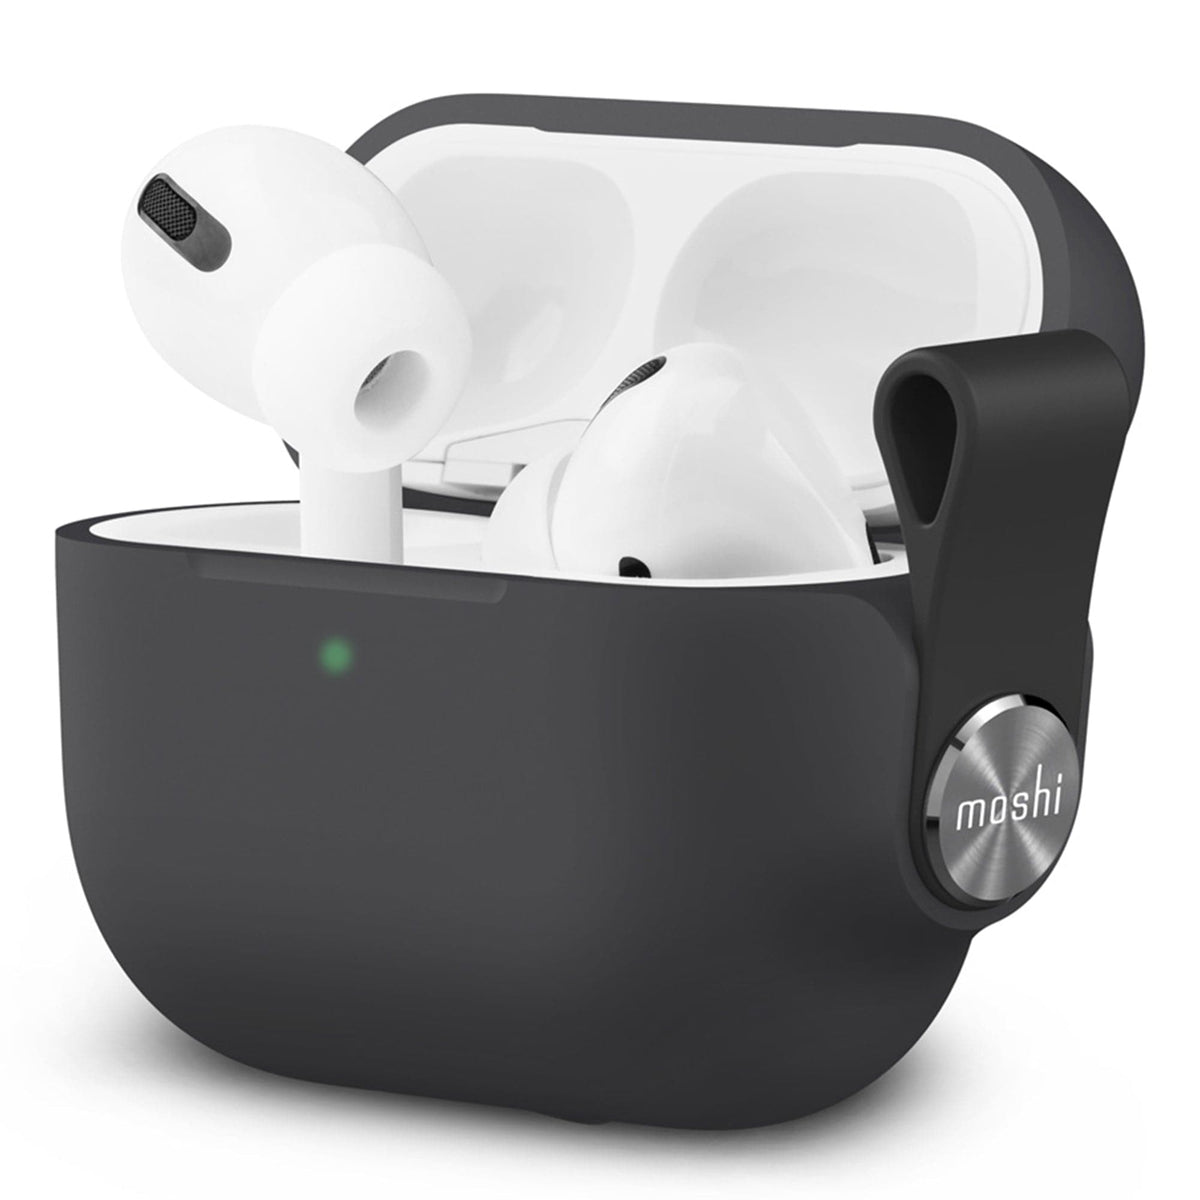 Moshi Pebbo for AirPods Pro, AirPods Case with Detachable Wrist Strap and LintGuard Protection